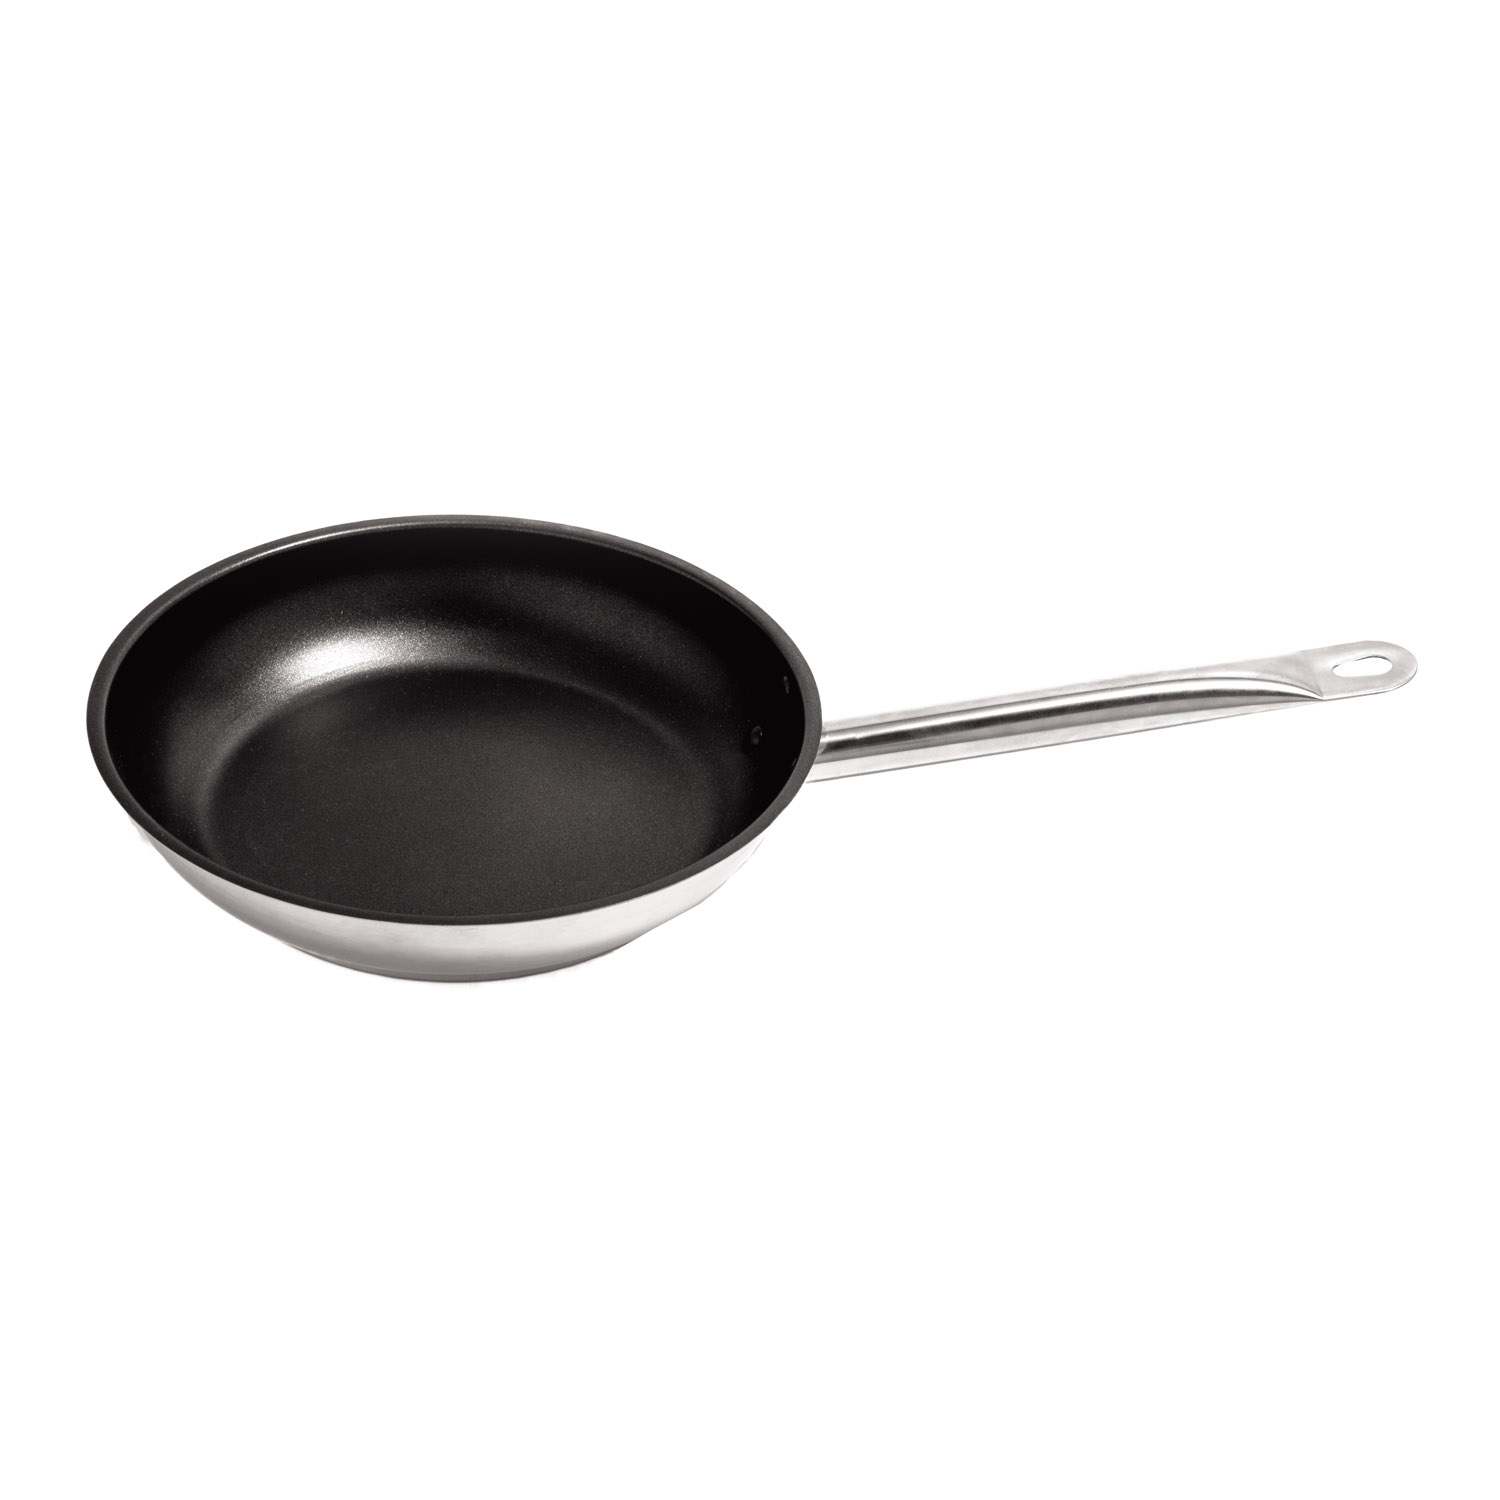 CAC China S2FP-11N Stainless Steel Non-Stick Fry Pan 11"